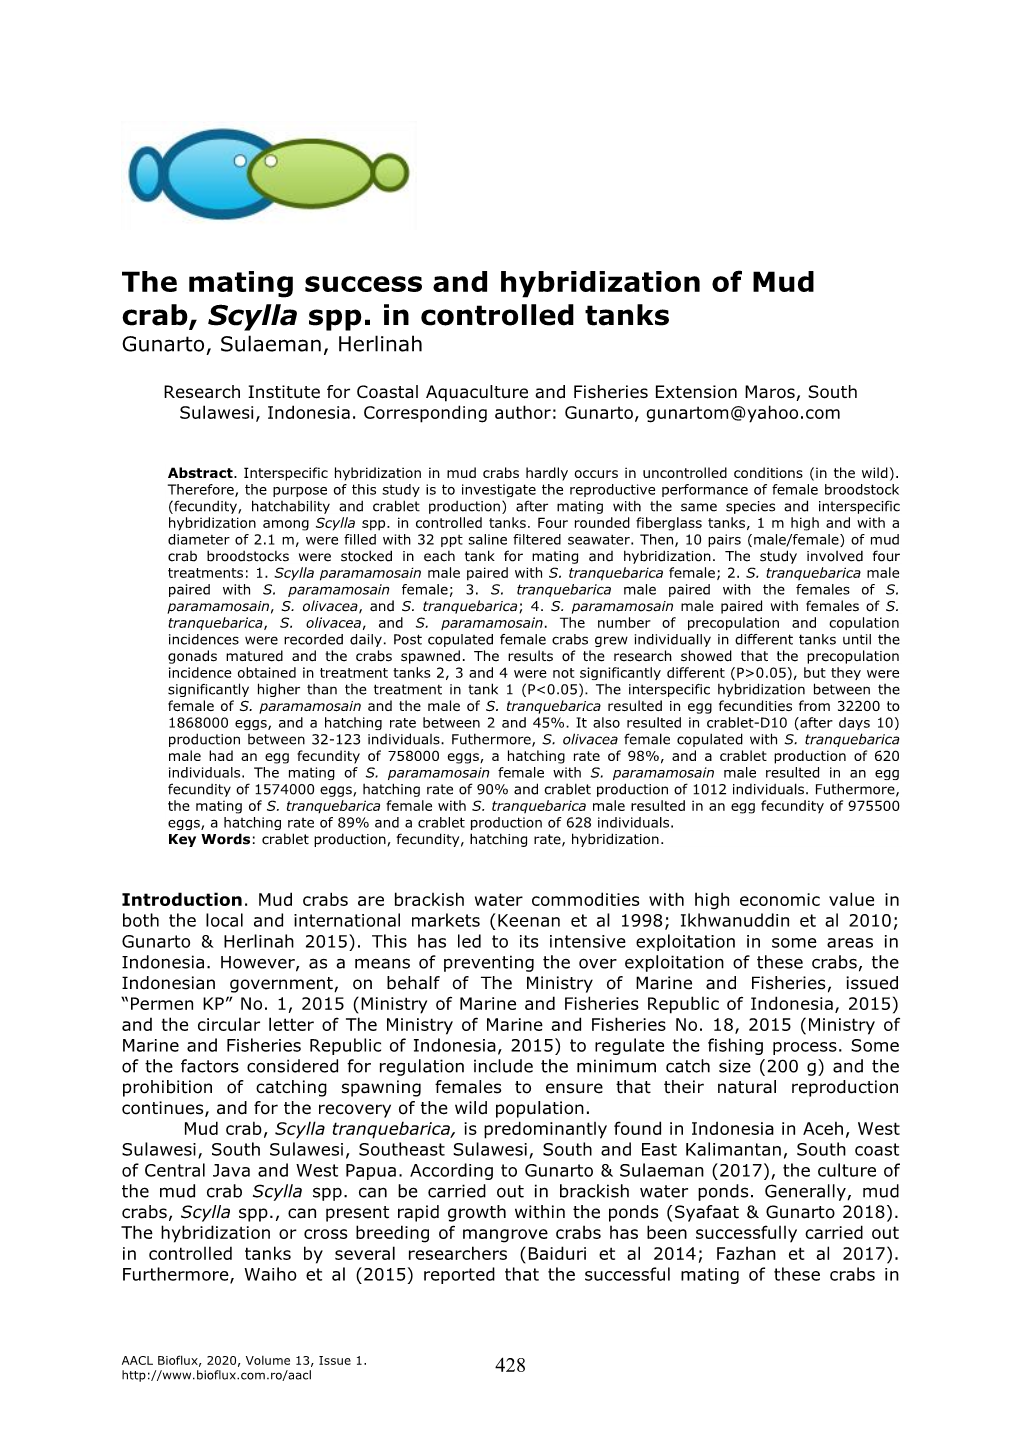 The Mating Success and Hybridization of Mud Crab, Scylla Spp. in Controlled Tanks Gunarto, Sulaeman, Herlinah